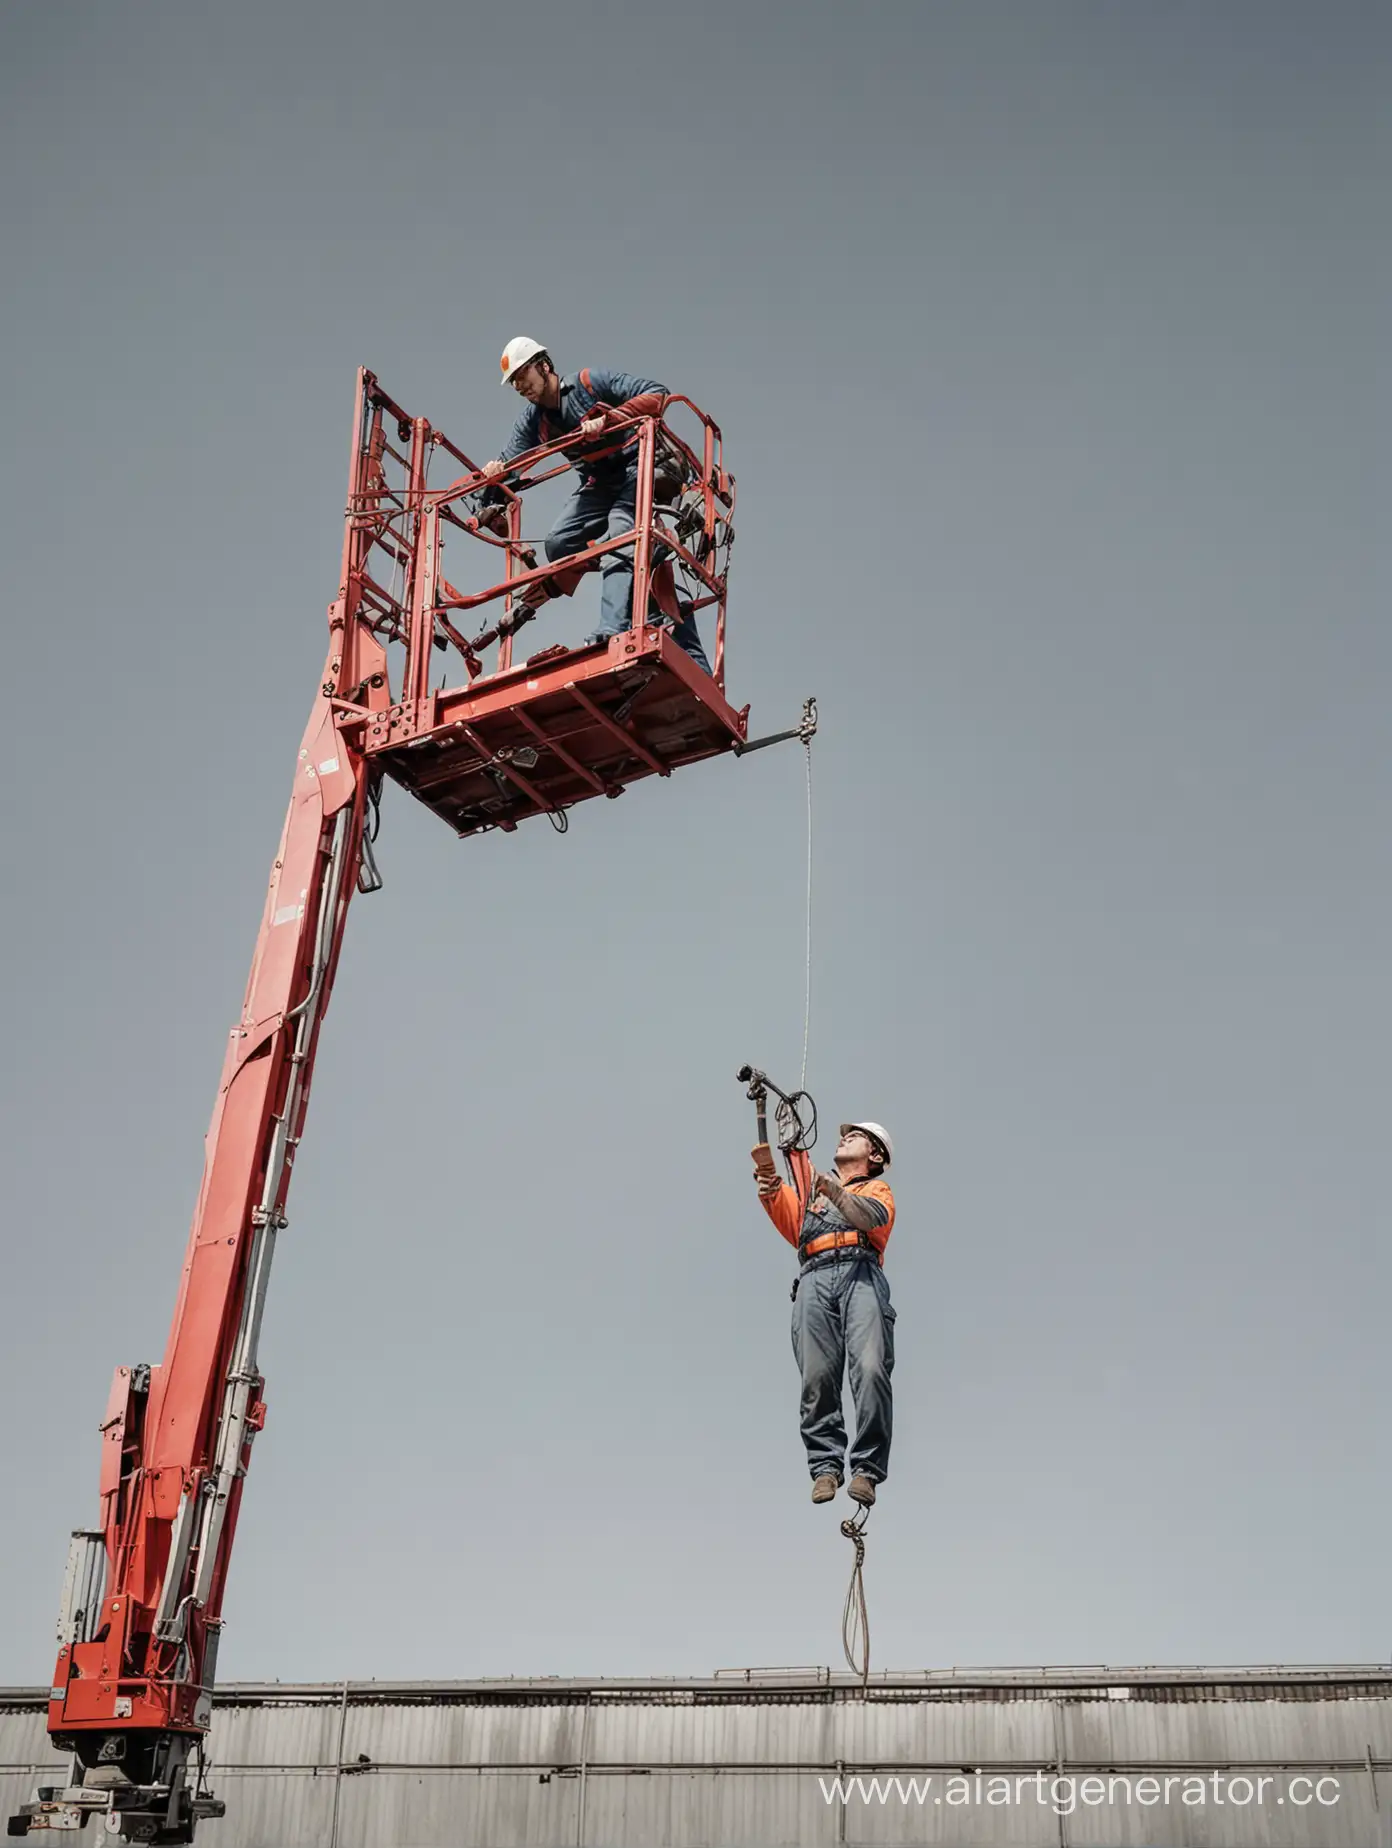 Superman-Pose-Worker-Ascends-on-Cherry-Picker-with-Helmet